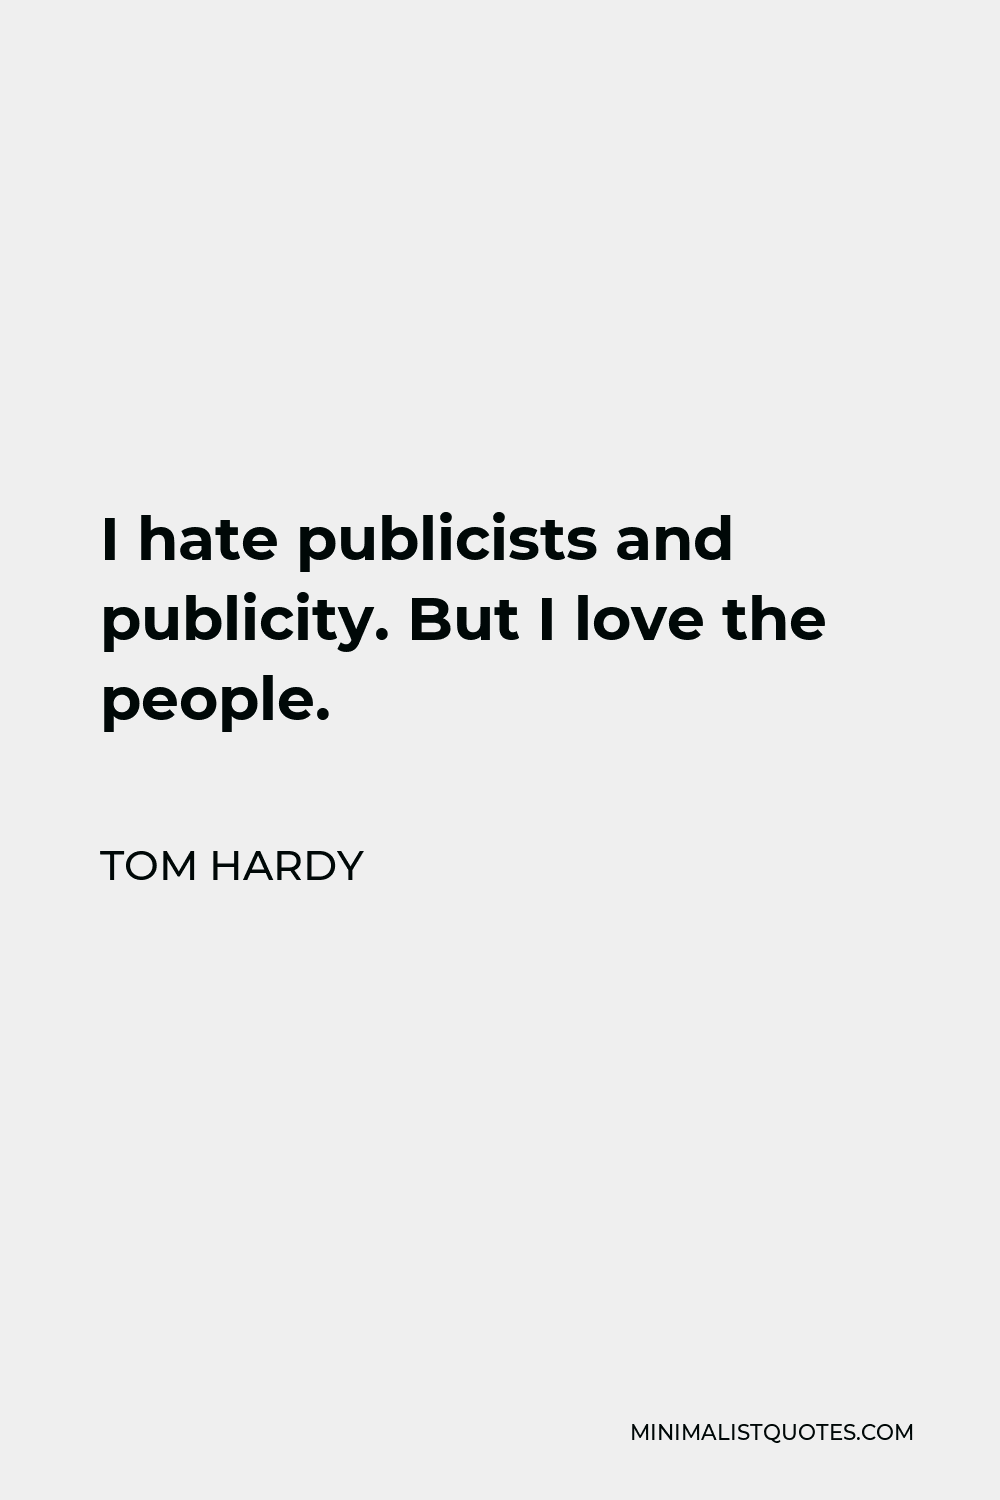 Tom Hardy Quote - I hate publicists and publicity. But I love the people.